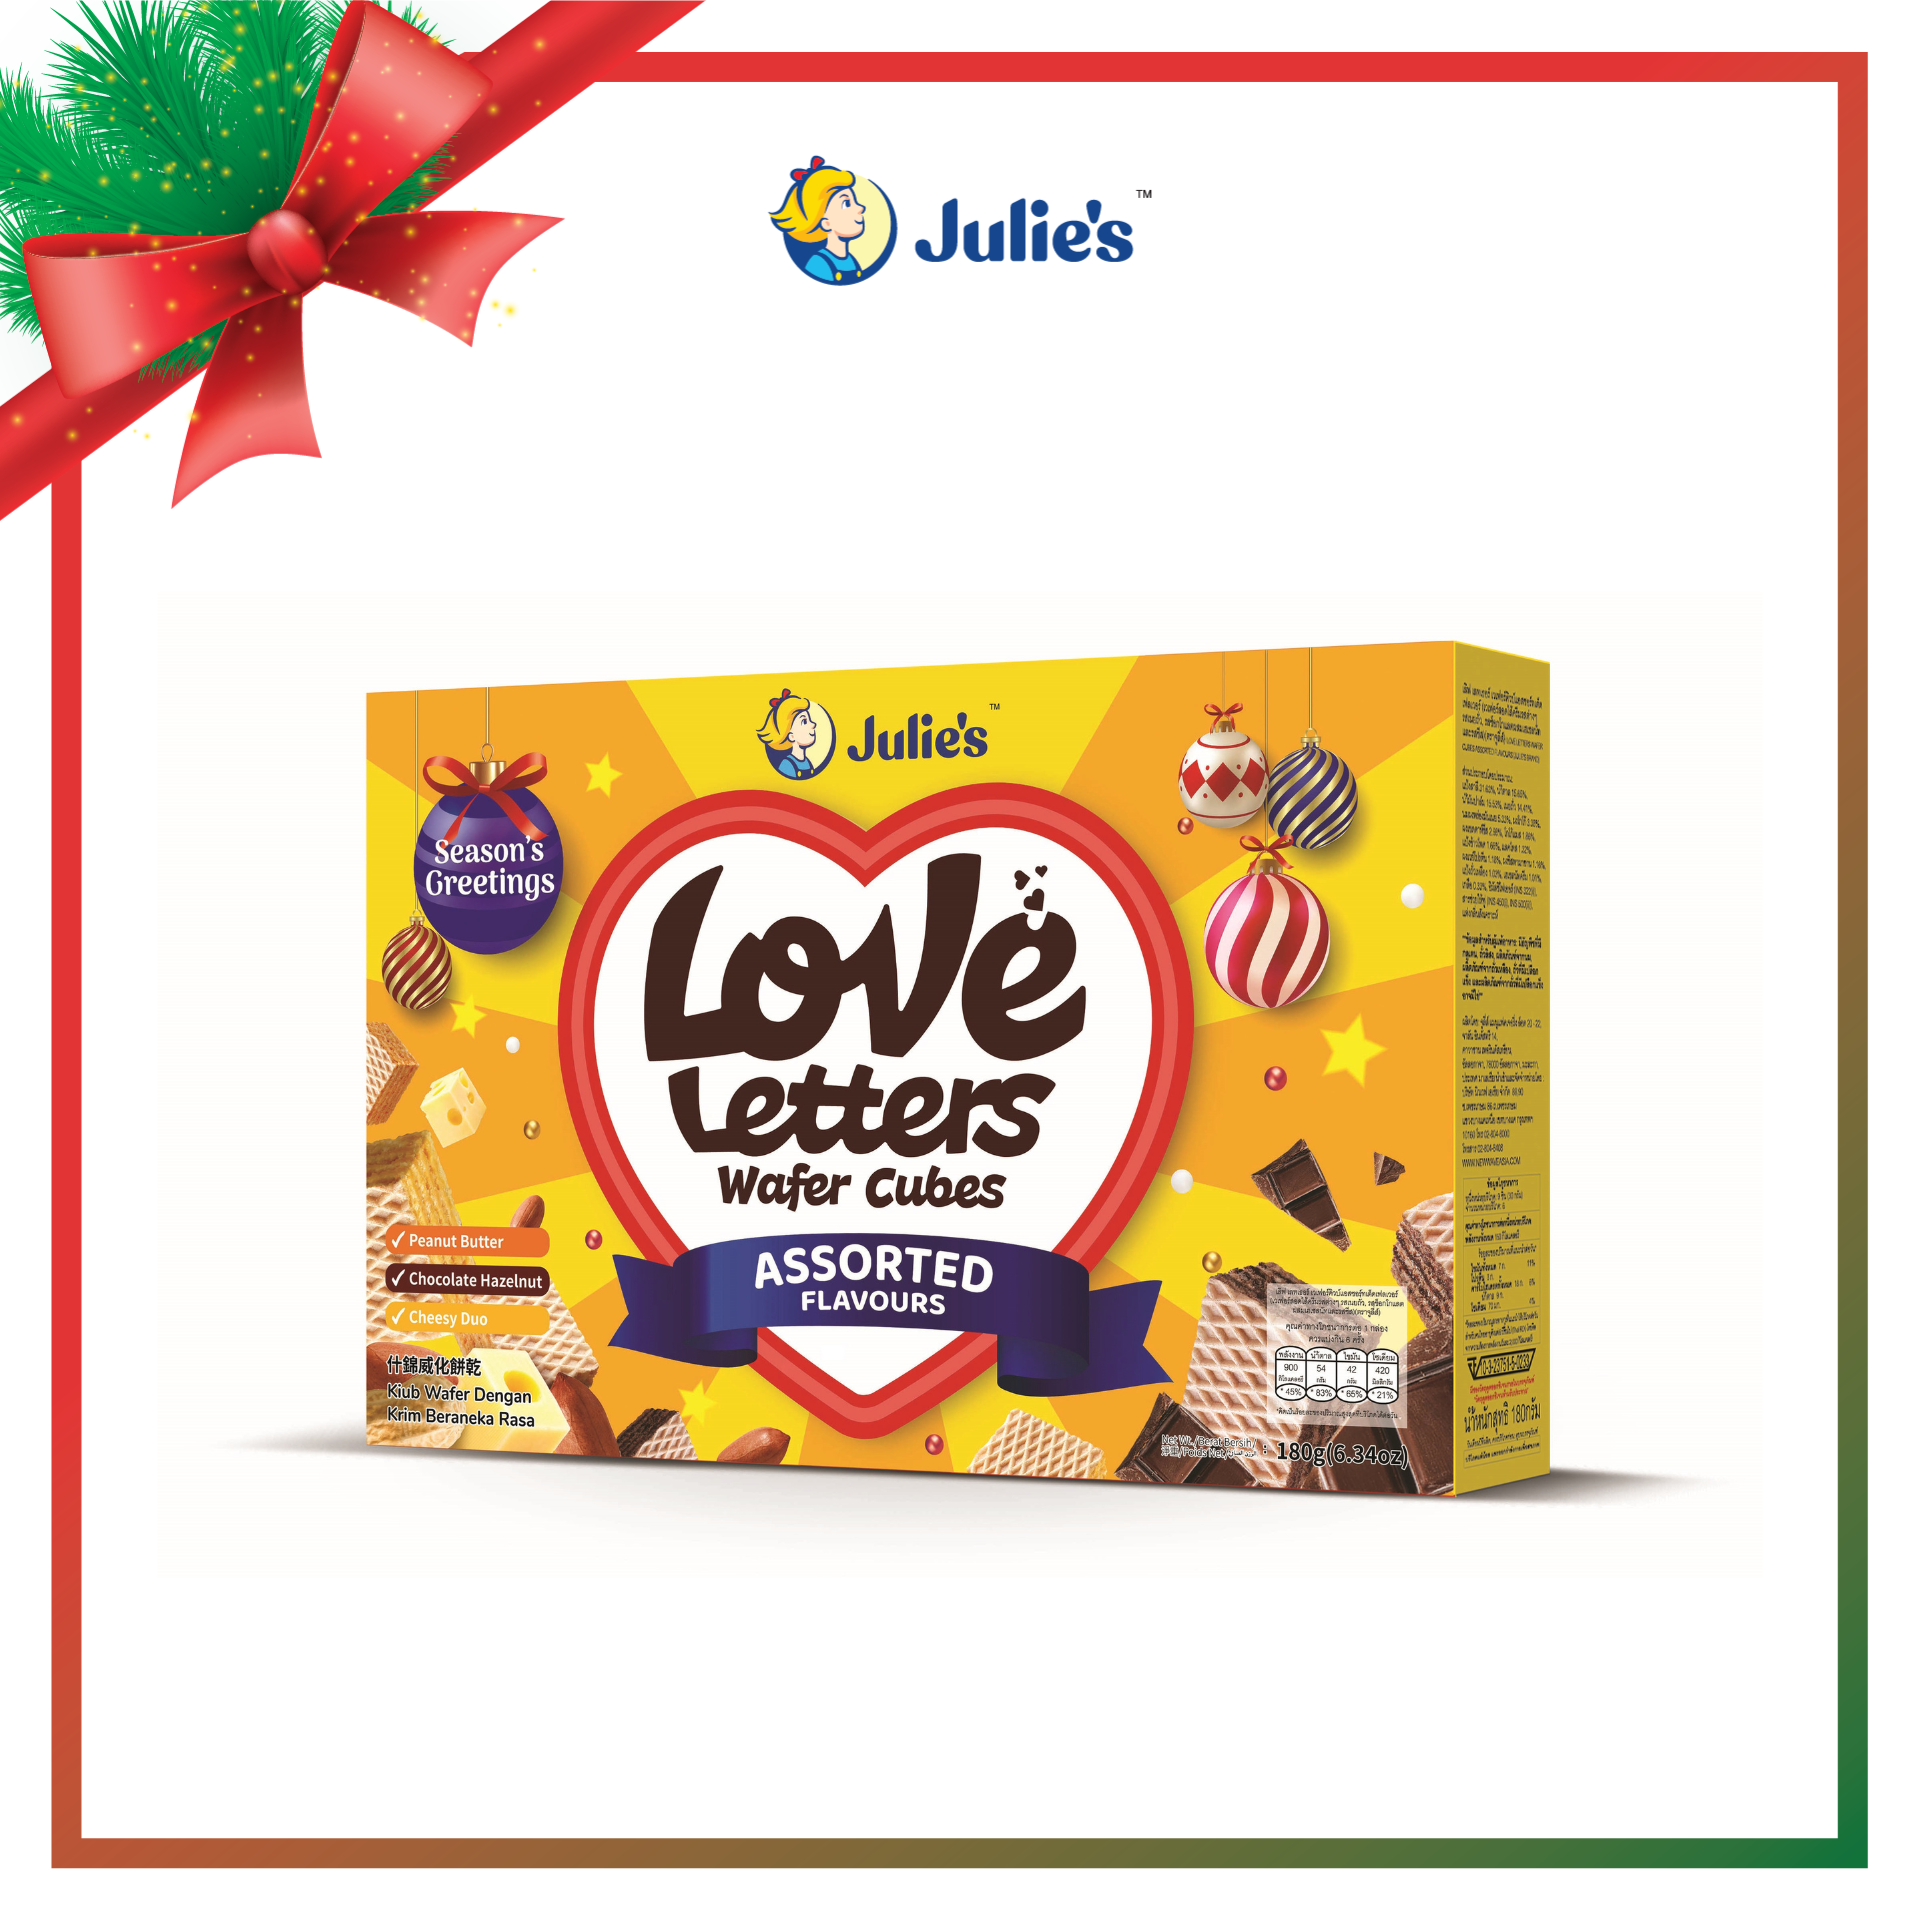 Julie\'s Love Letters Wafer Cubes Assorted 180g (Season\'s Greetings)